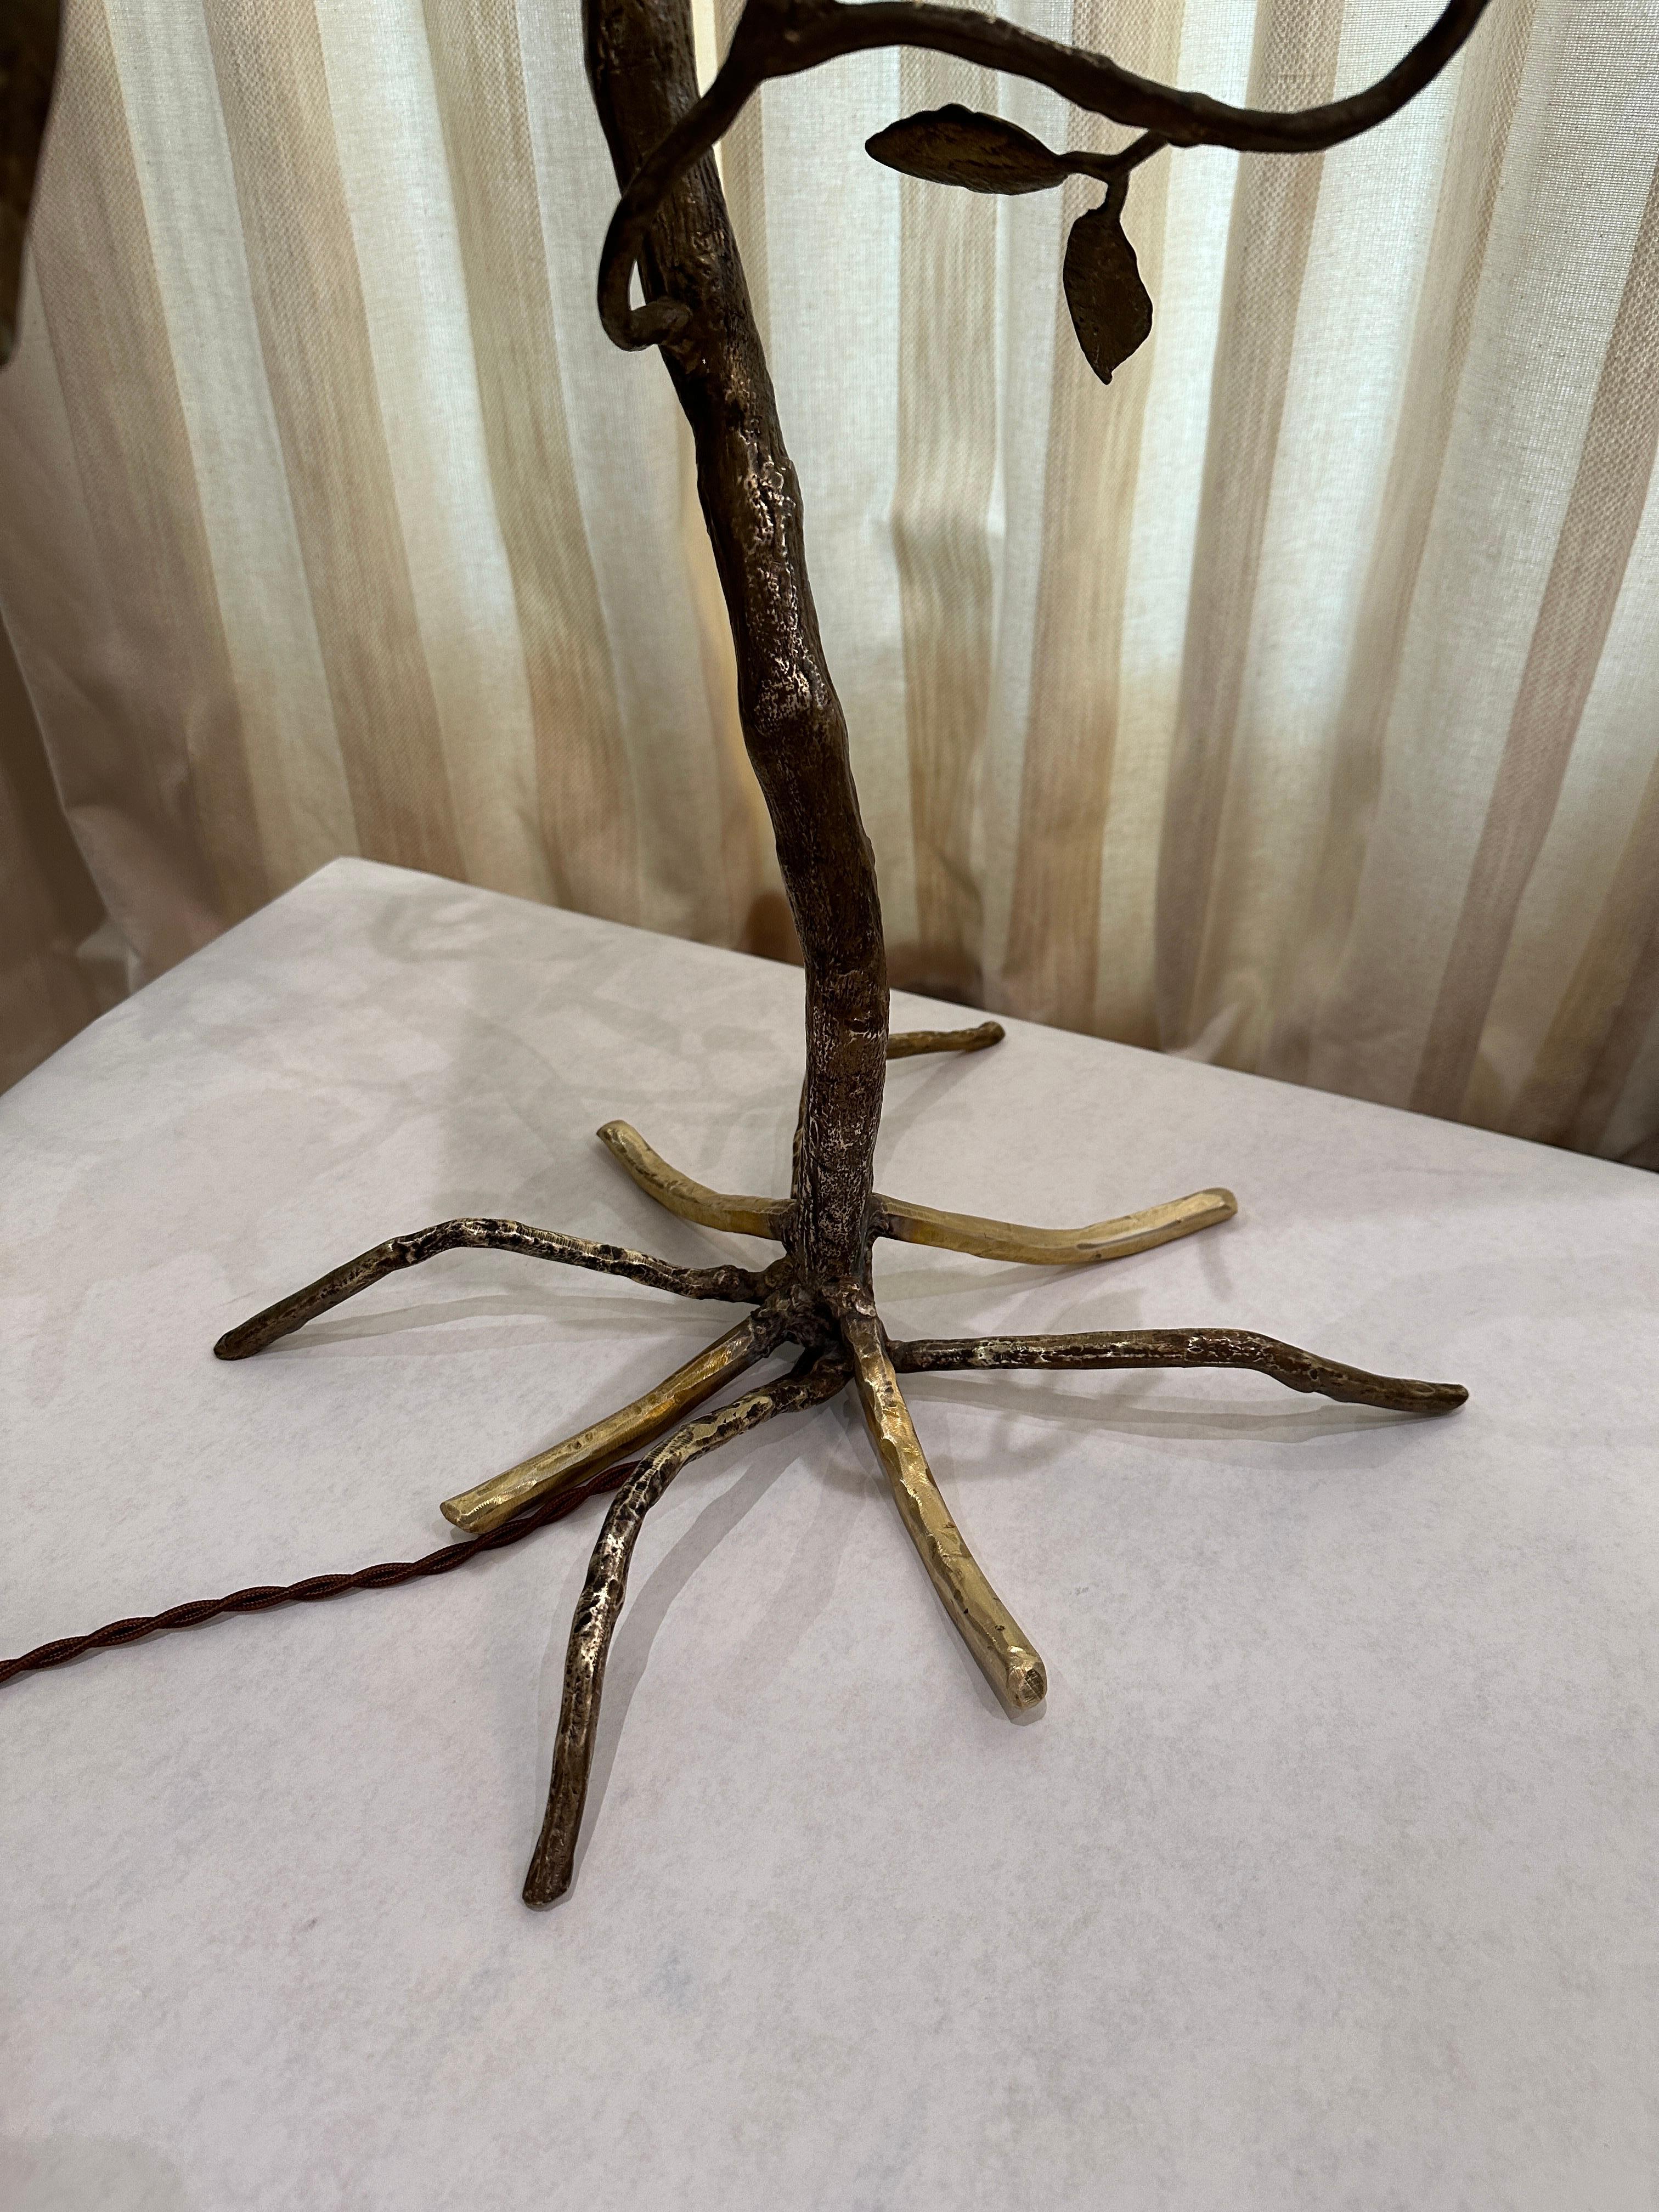 Similar to the works of Lalanne or Giacometti, this wonderfully crafted bronze tree with various leaves and parrots on branches adorning it has been rewired and does not come with shade shown (photo purposes only). So much detail and whimsy!  THIS